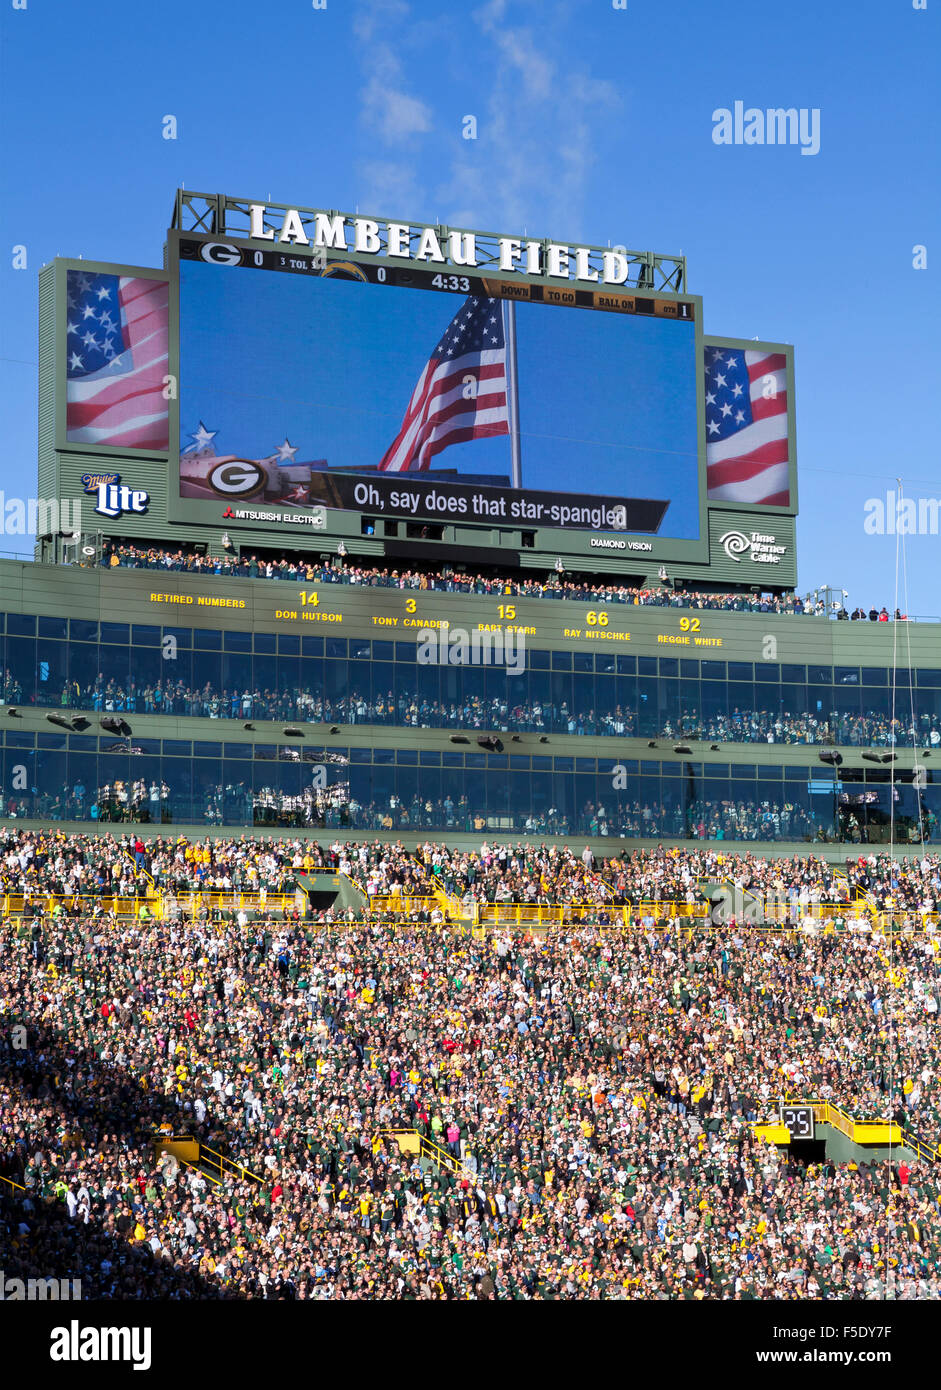 Lambeau Field in Green Bay, Wisconsin is home to the NFL football team Green Bay Packers. Stock Photo